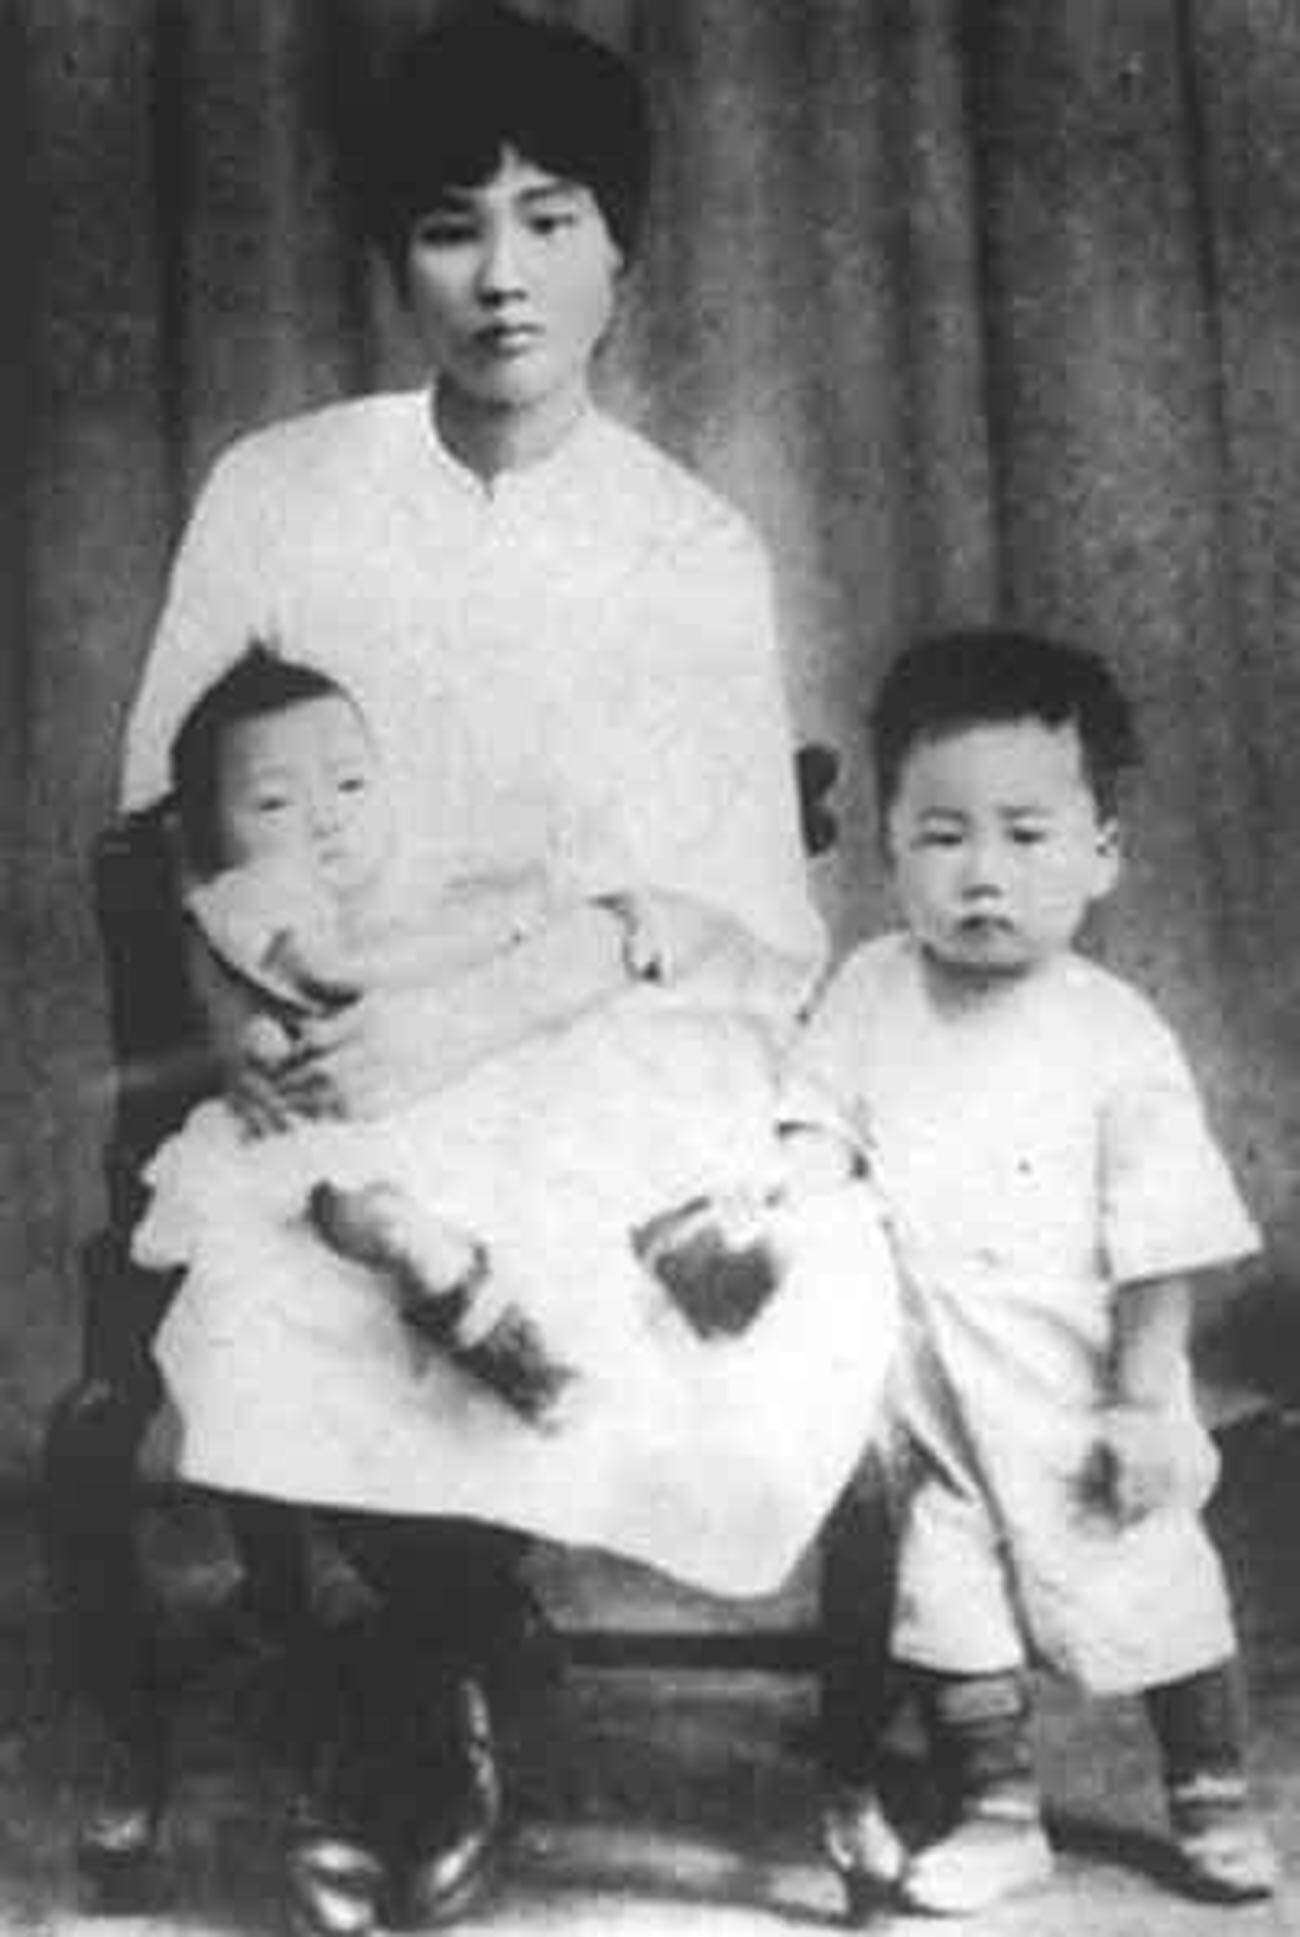 Yang Kaihui and her sons Mao Anqin and Mao Anying.